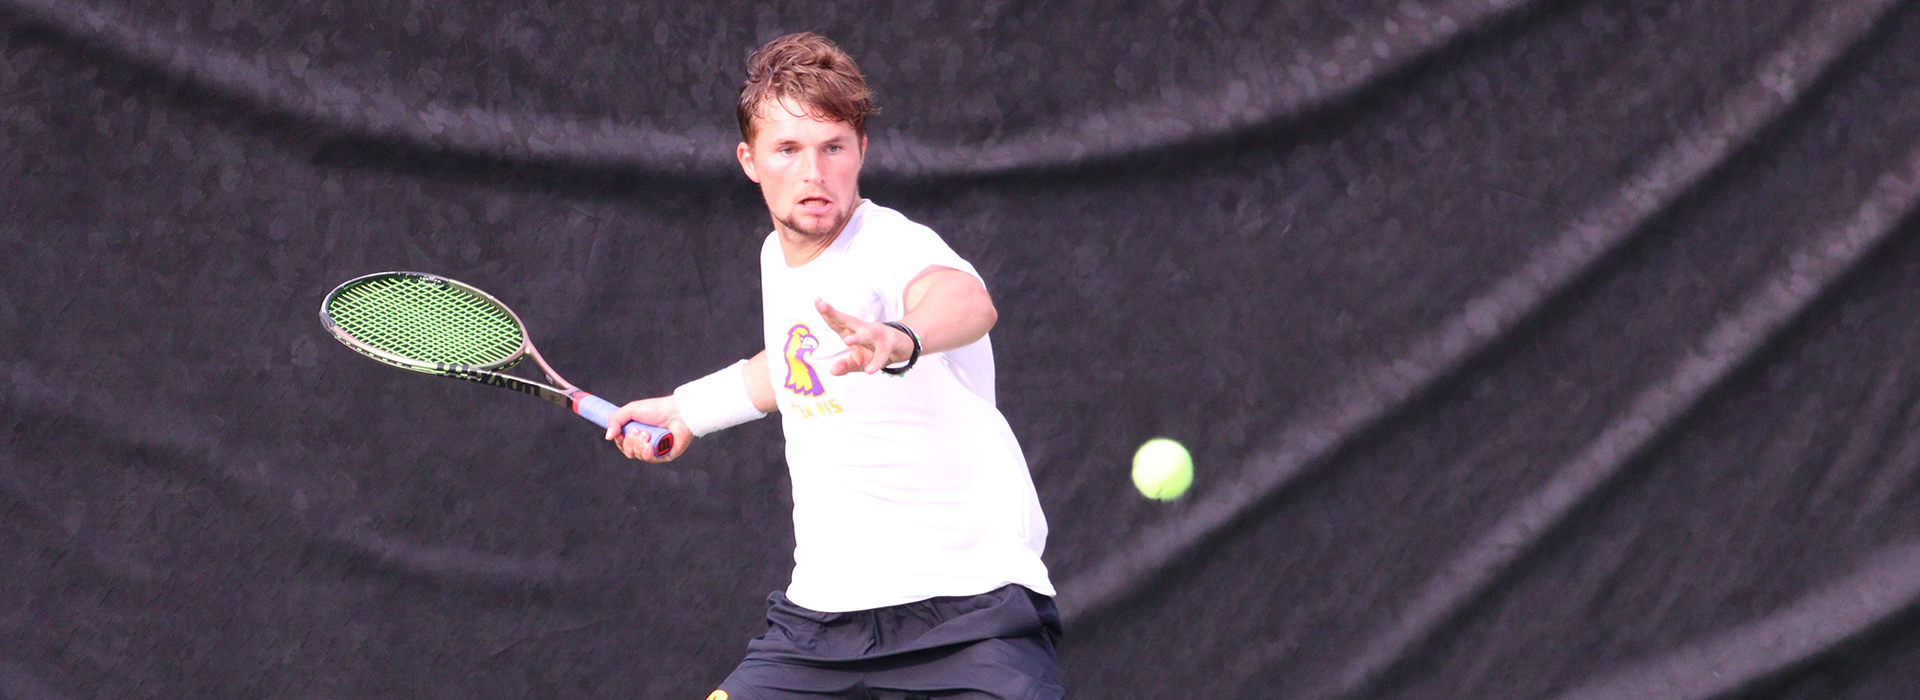 Tech tennis closes out regular season with Friday home match vs. TSU, trip to Belmont Saturday